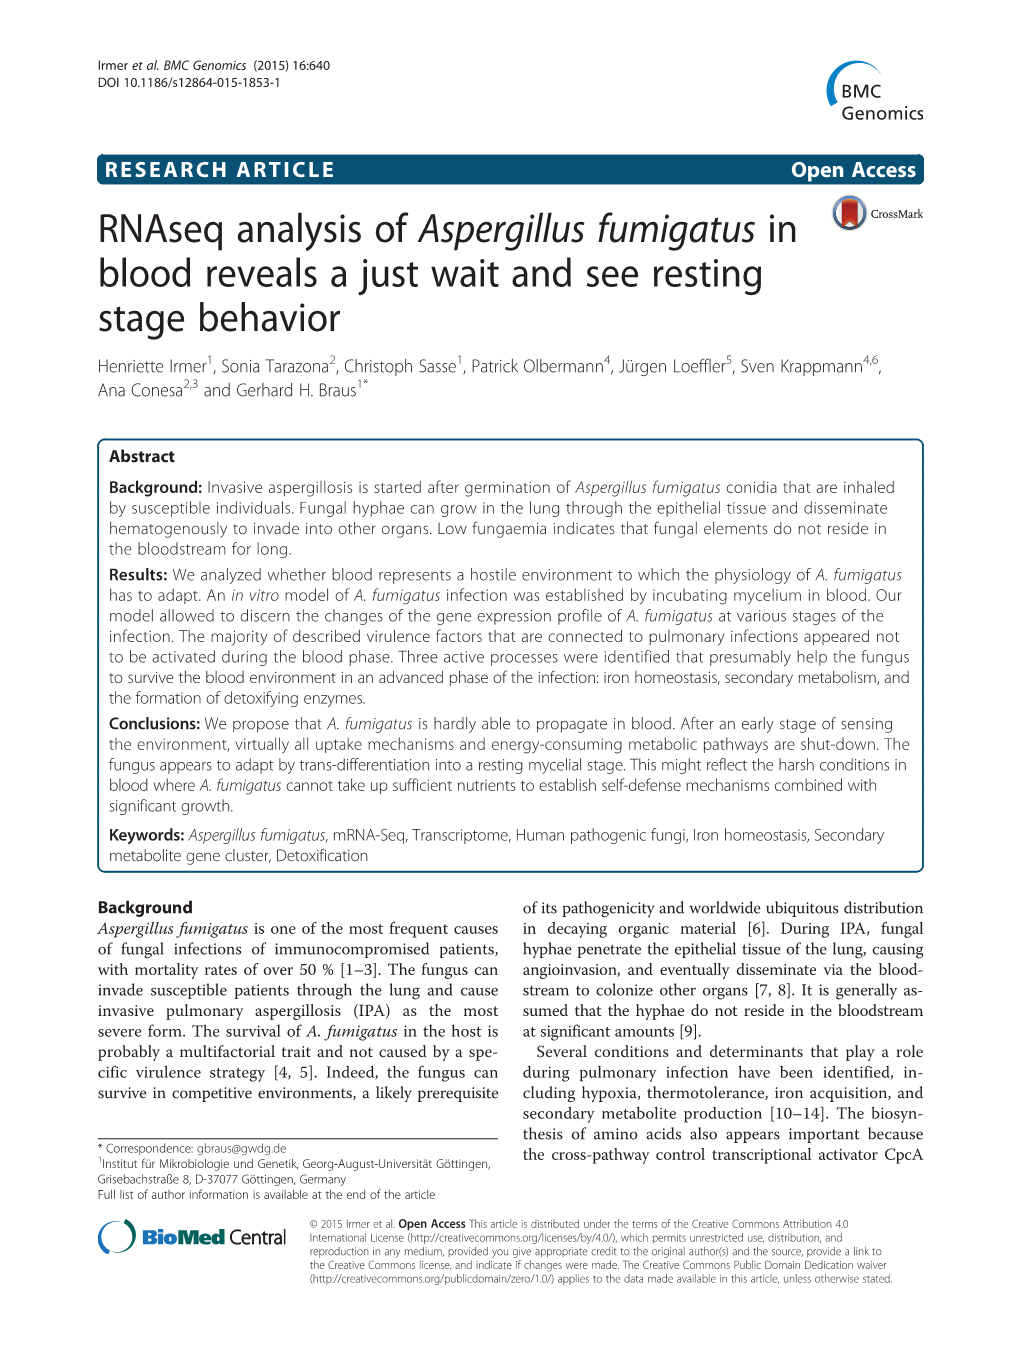 Rnaseq Analysis of Aspergillus Fumigatus in Blood Reveals a Just Wait and See Resting Stage Behavior